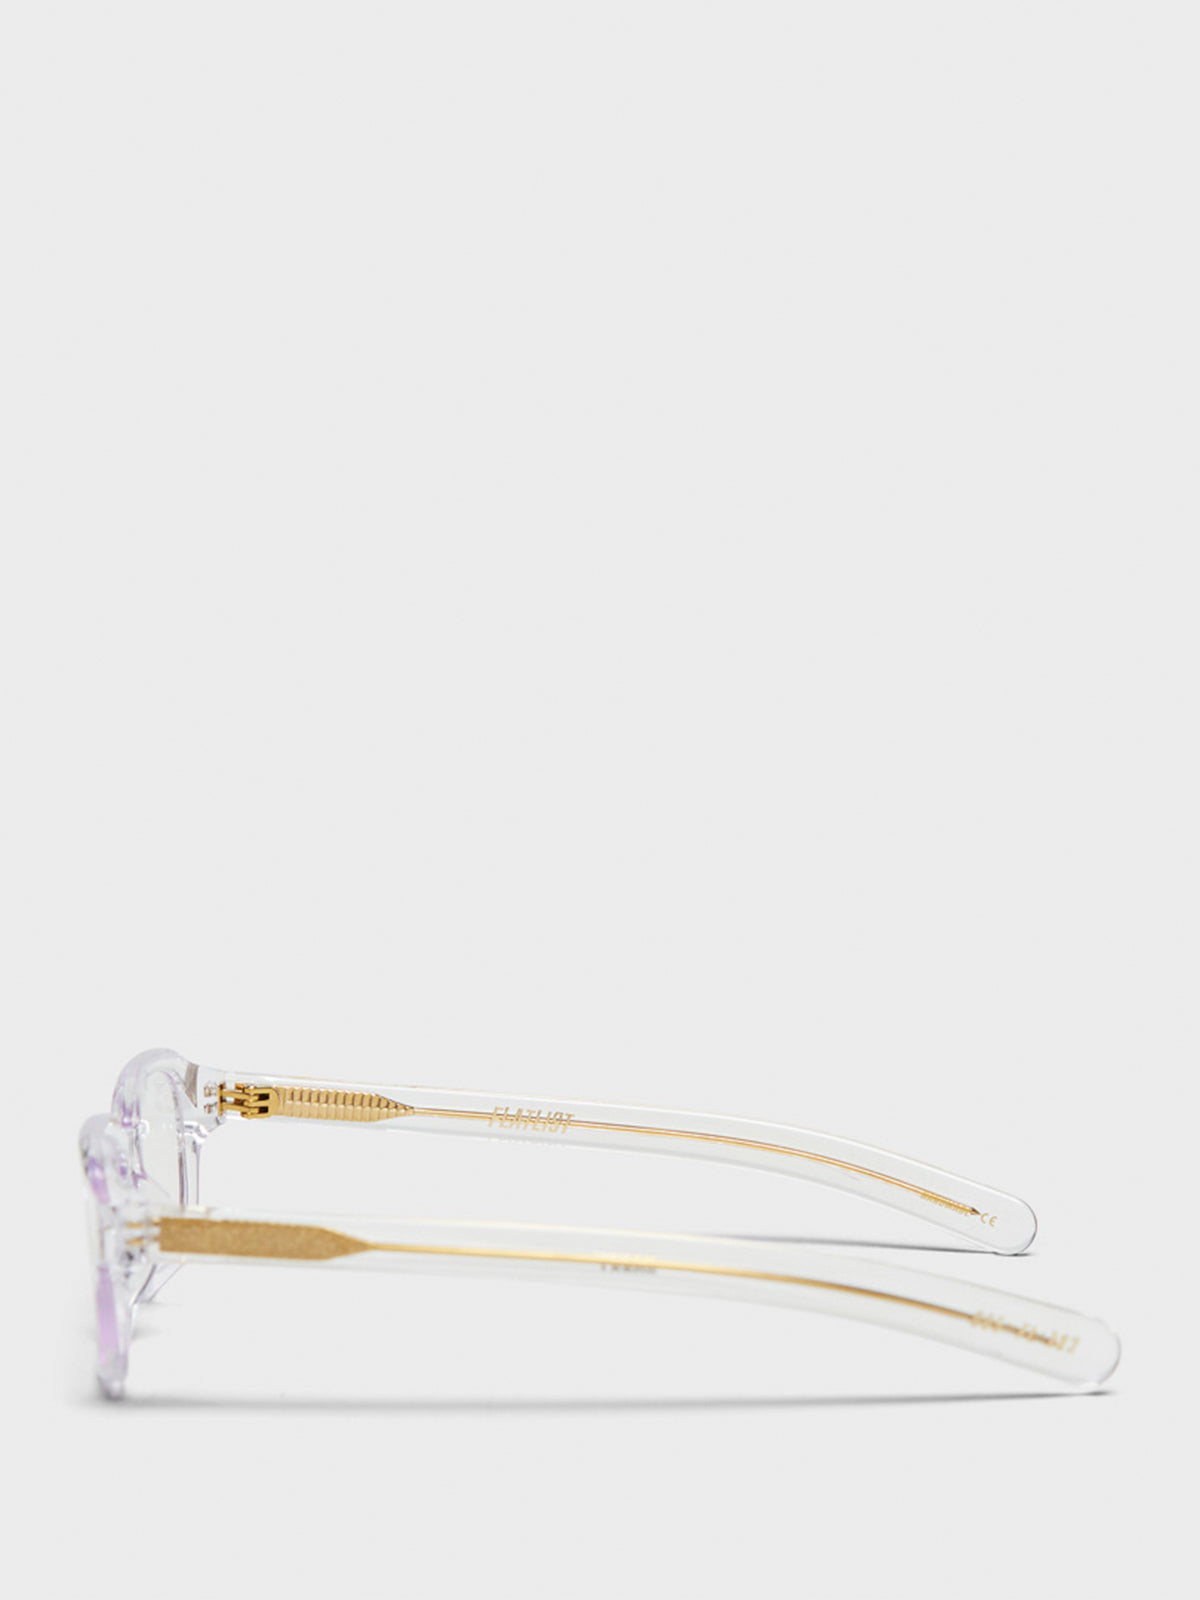 Hanky Sunglasses in Clear Crystal and Clear Lens